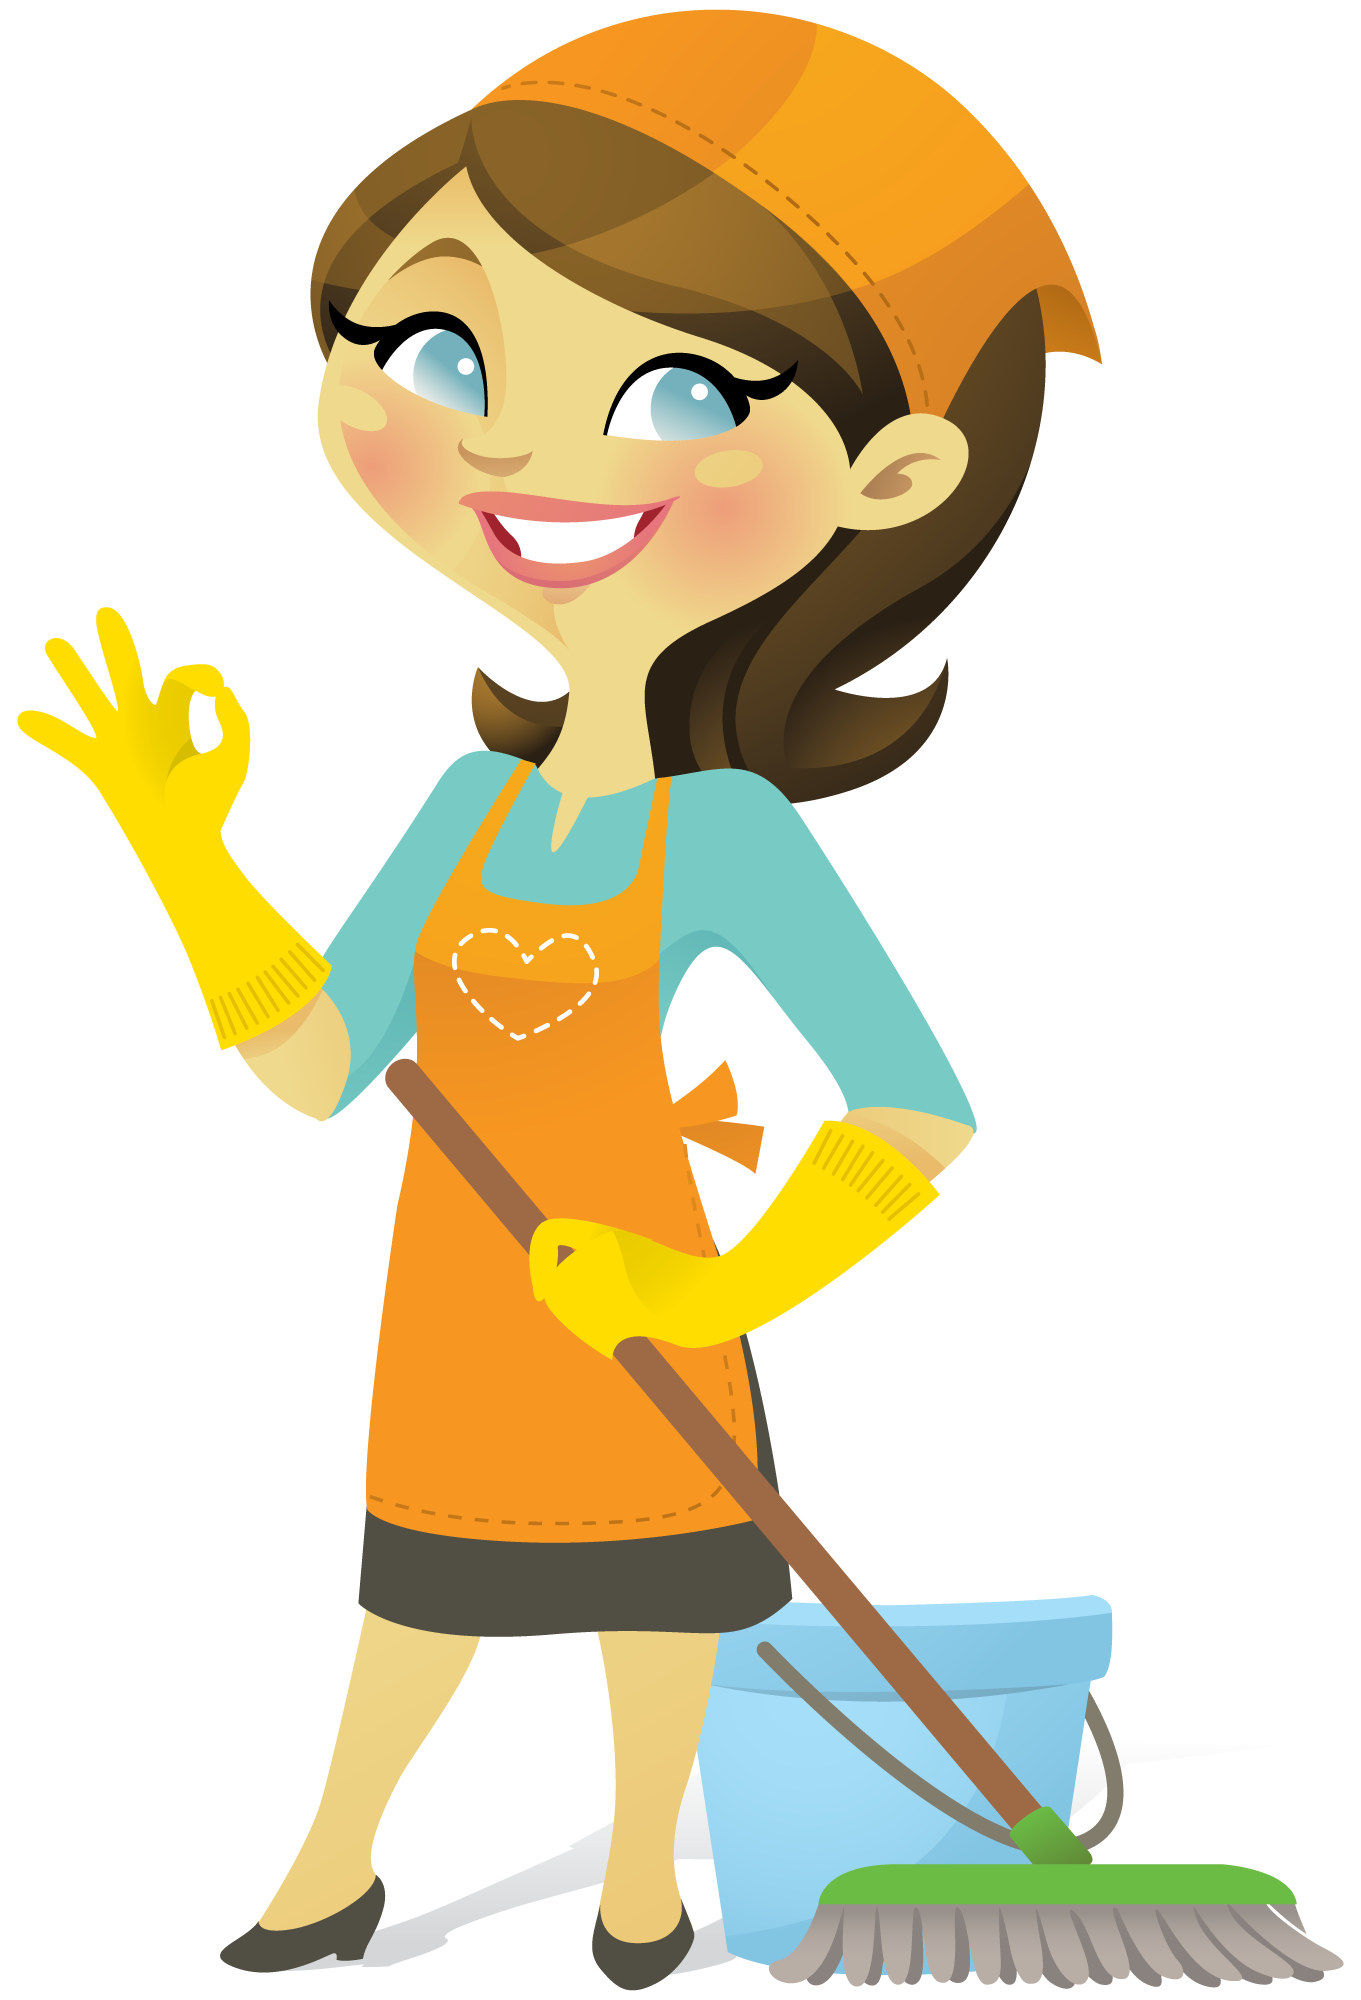 janitor clipart hospital housekeeping